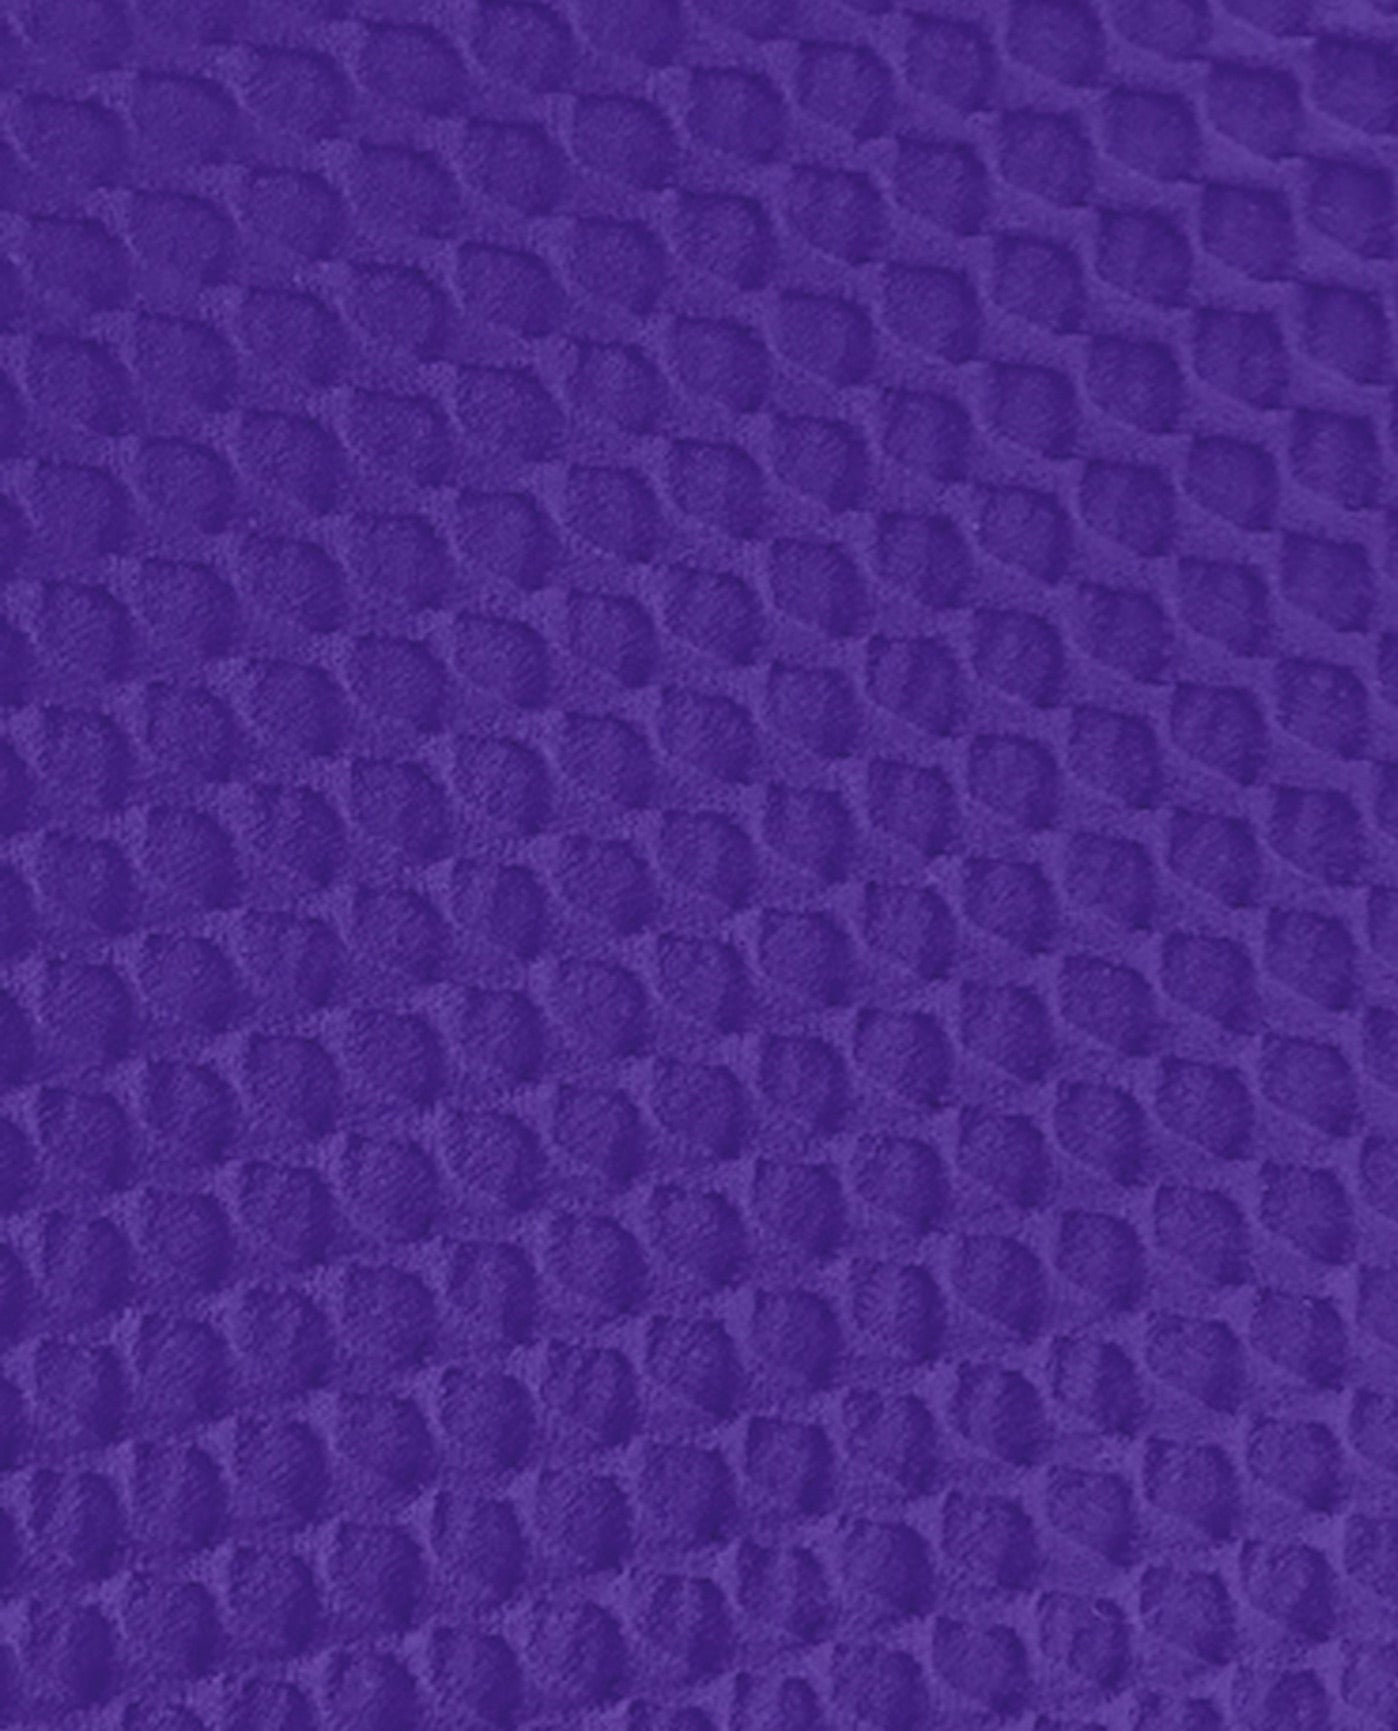 FABRIC SWATCH VIEW OF CHLORINE RESISTANT AQUAMORE SOLID TEXTURED HIGH NECK MASTECTOMY ONE PIECE SWIMSUIT | 510 AQT TEXTURED PURPLE